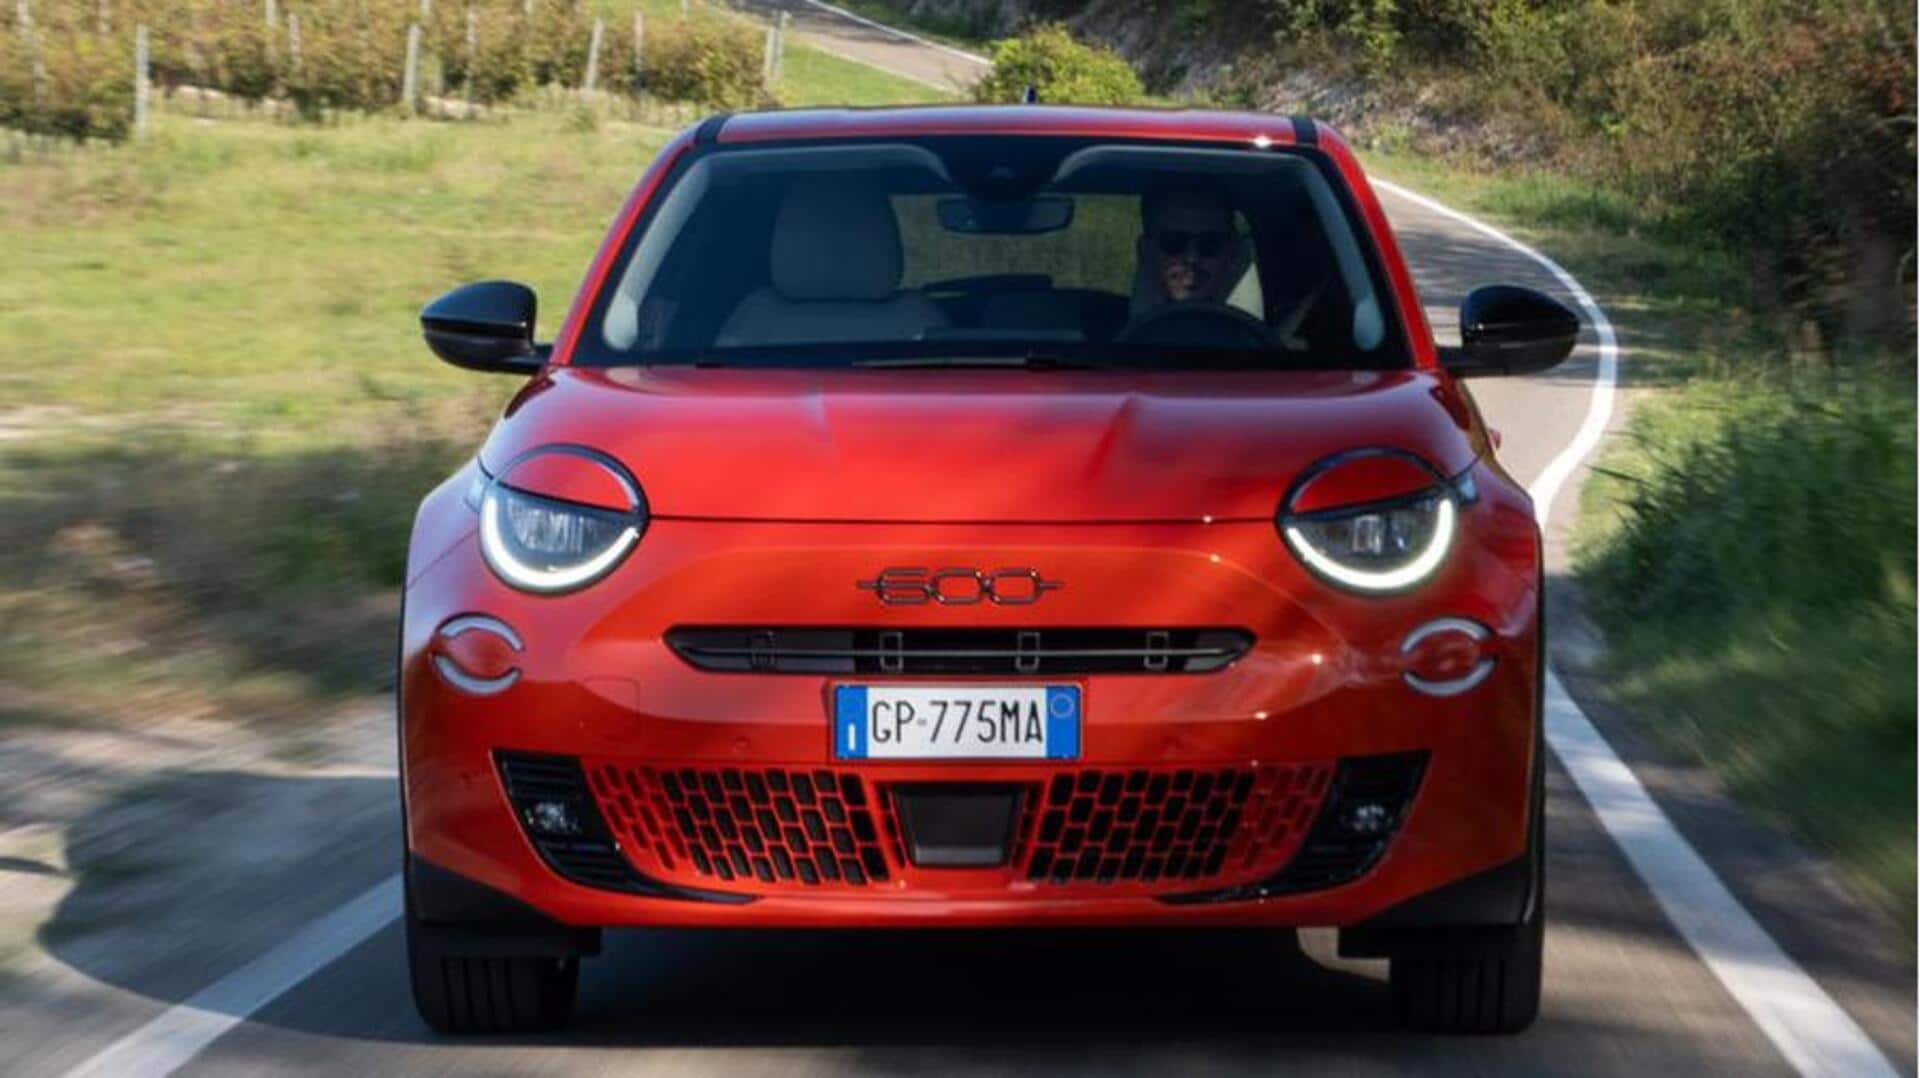 Fiat 600e all-electric crossover goes official: Check prices, features